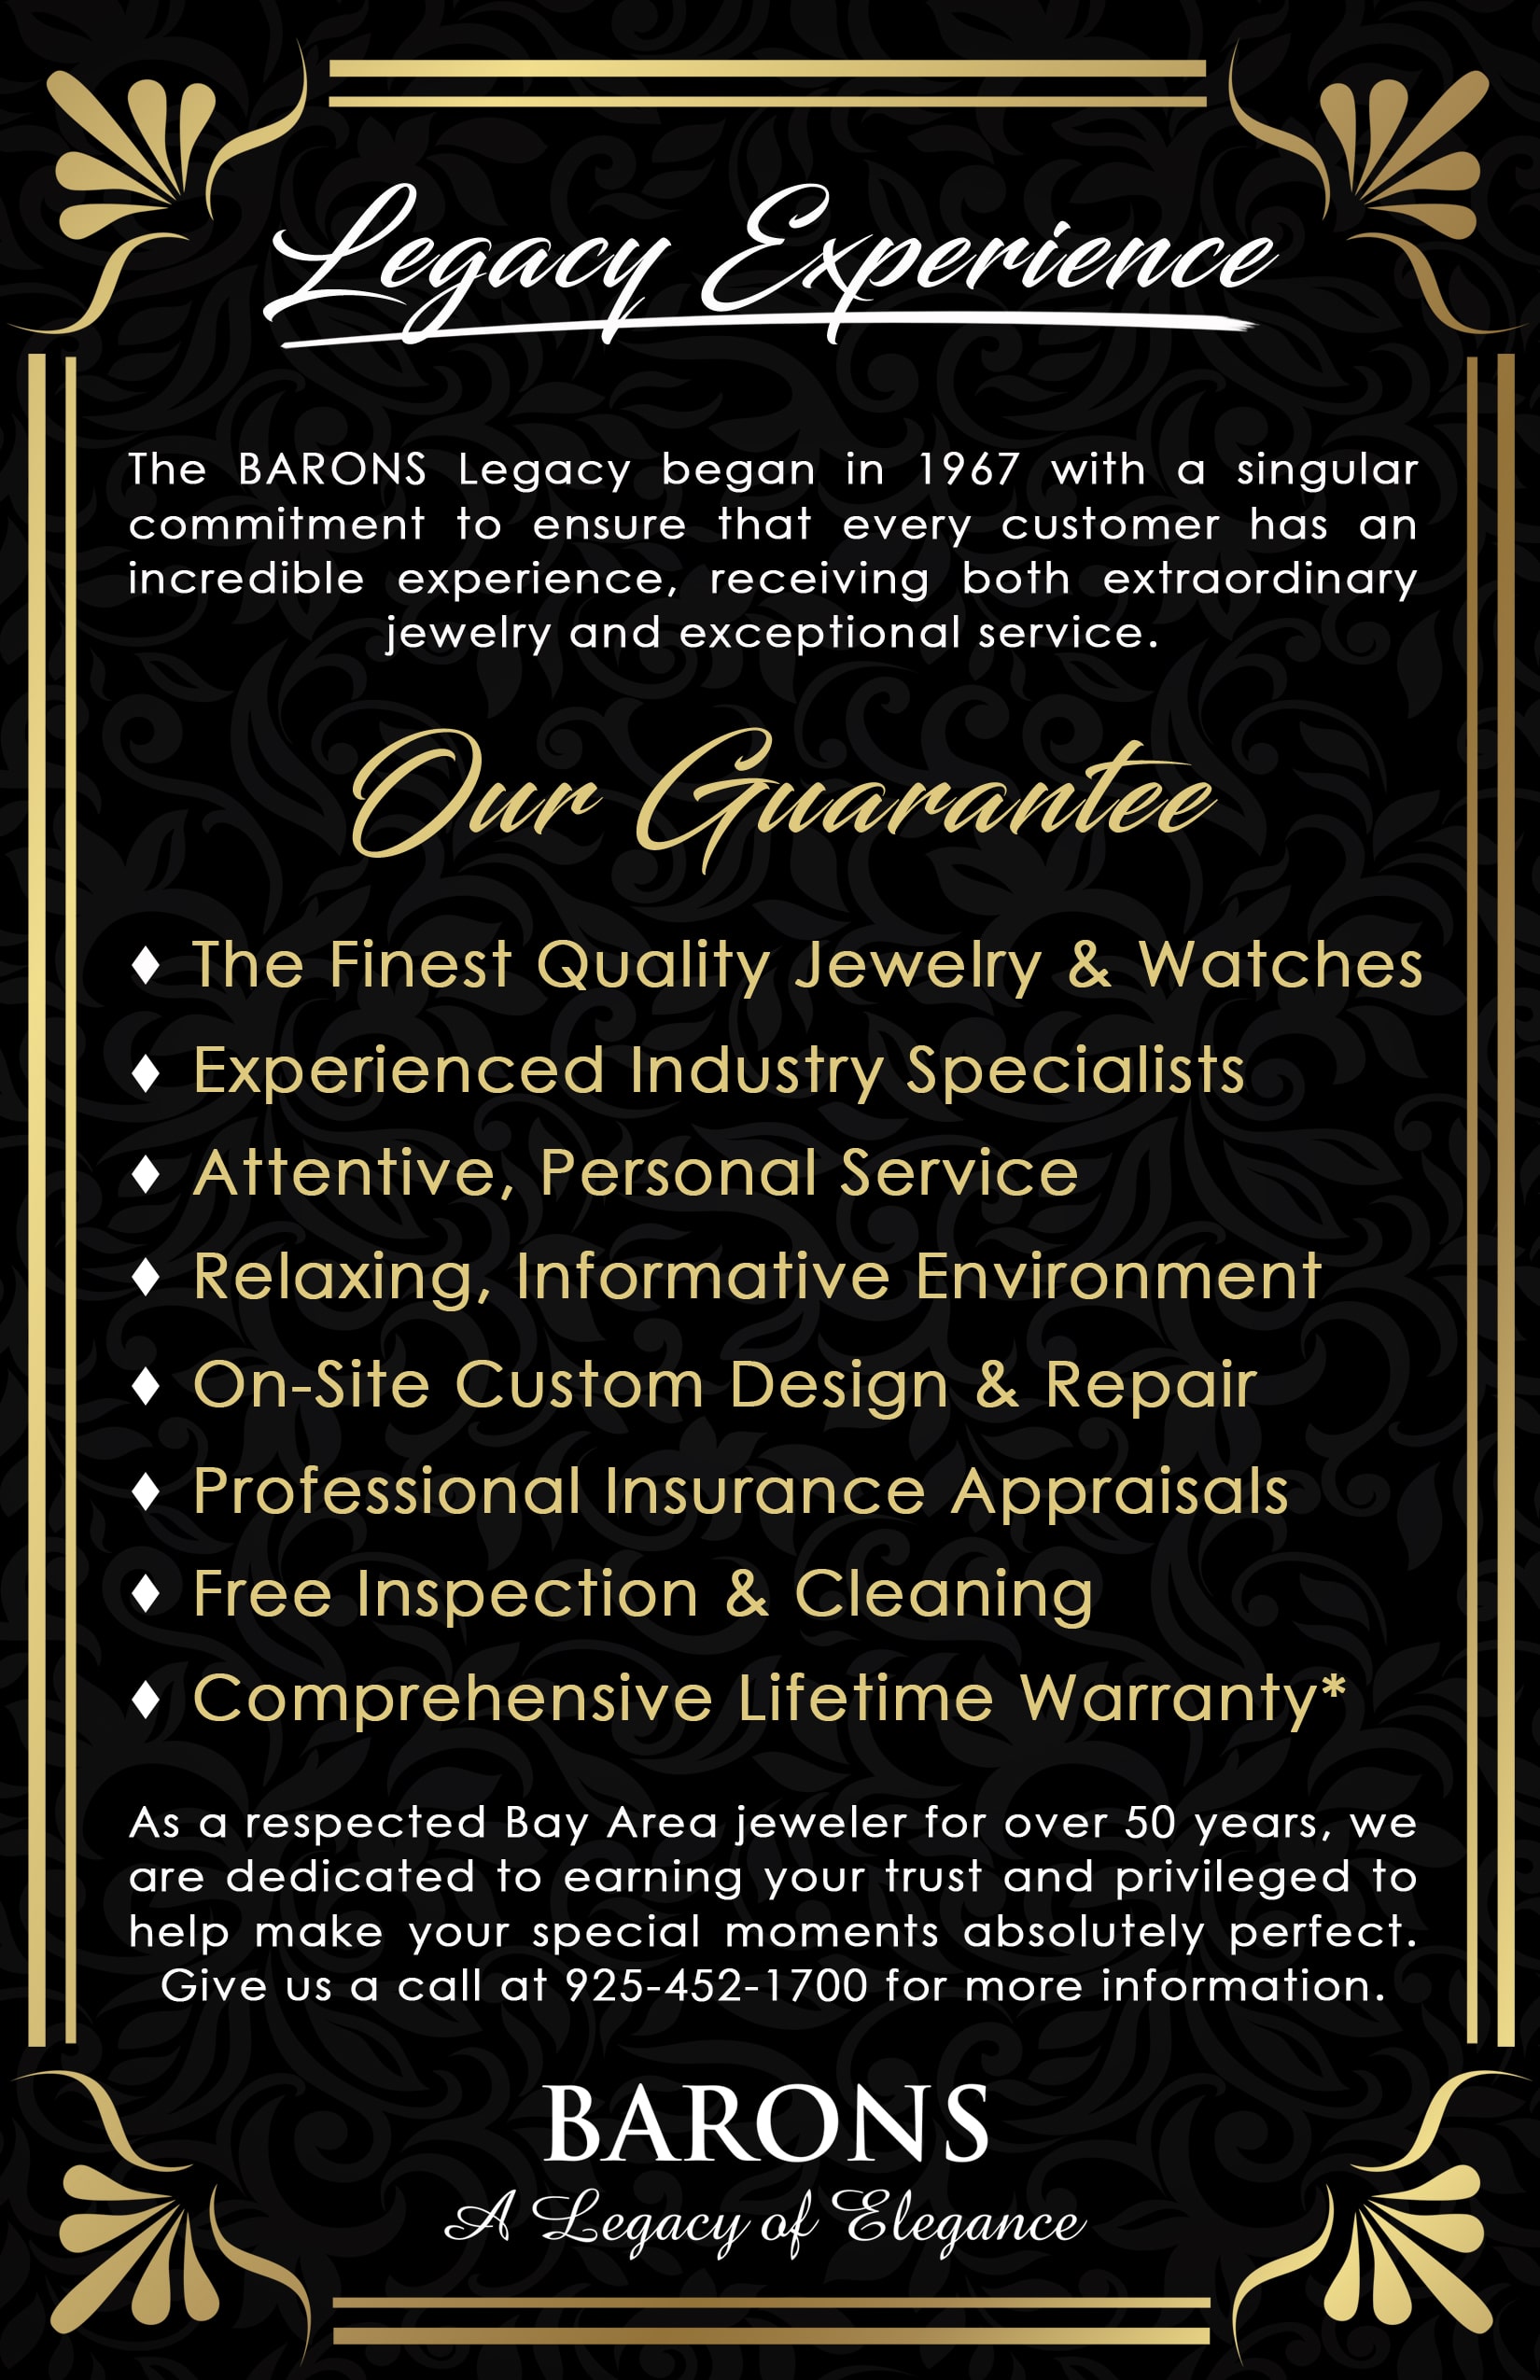 Our Guarantee banner